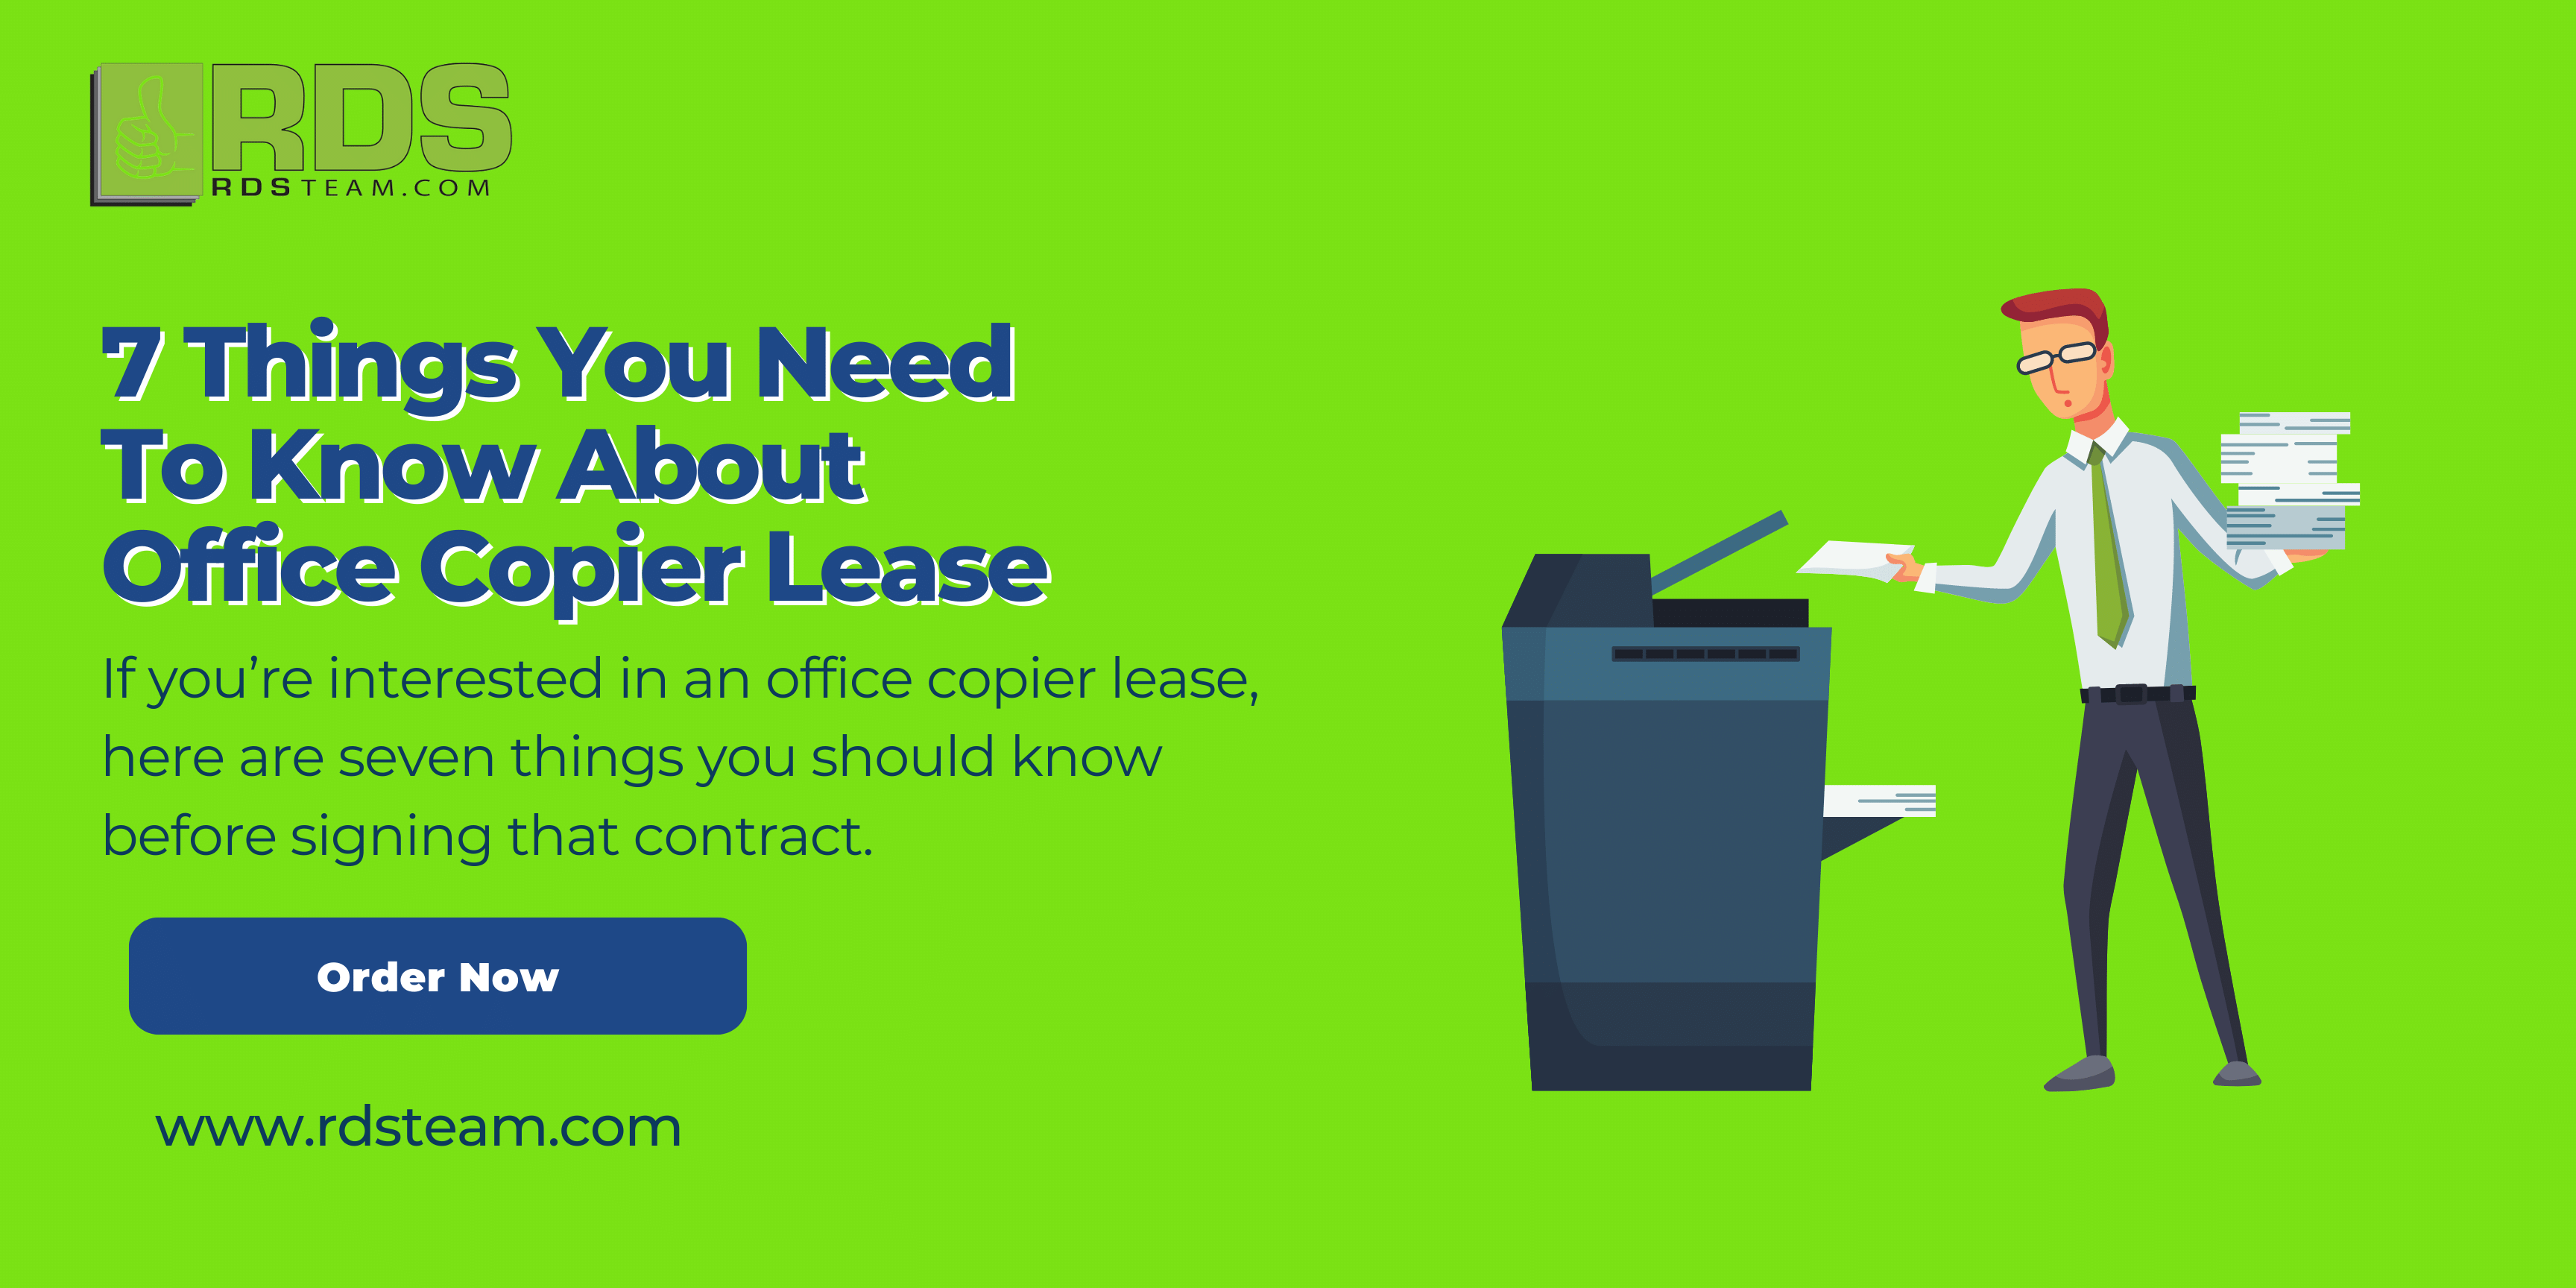 7 Things You Need To Know About Office Copier Lease￼